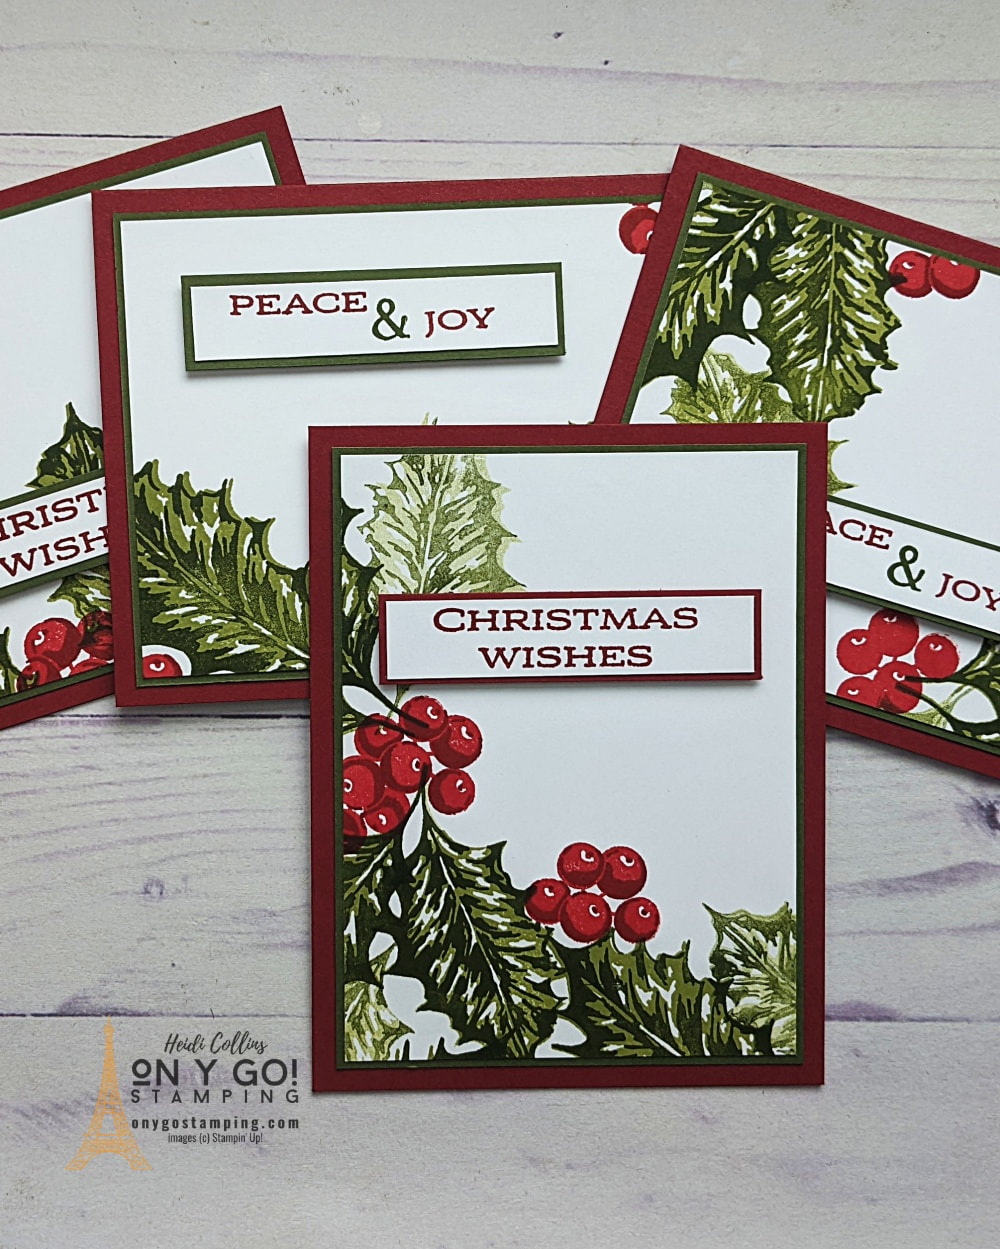 Make beautiful handmade Christmas cards quickly with the four-square card technique. Sample card uses the Leaves of Holly stamp set from Stampin' Up!®